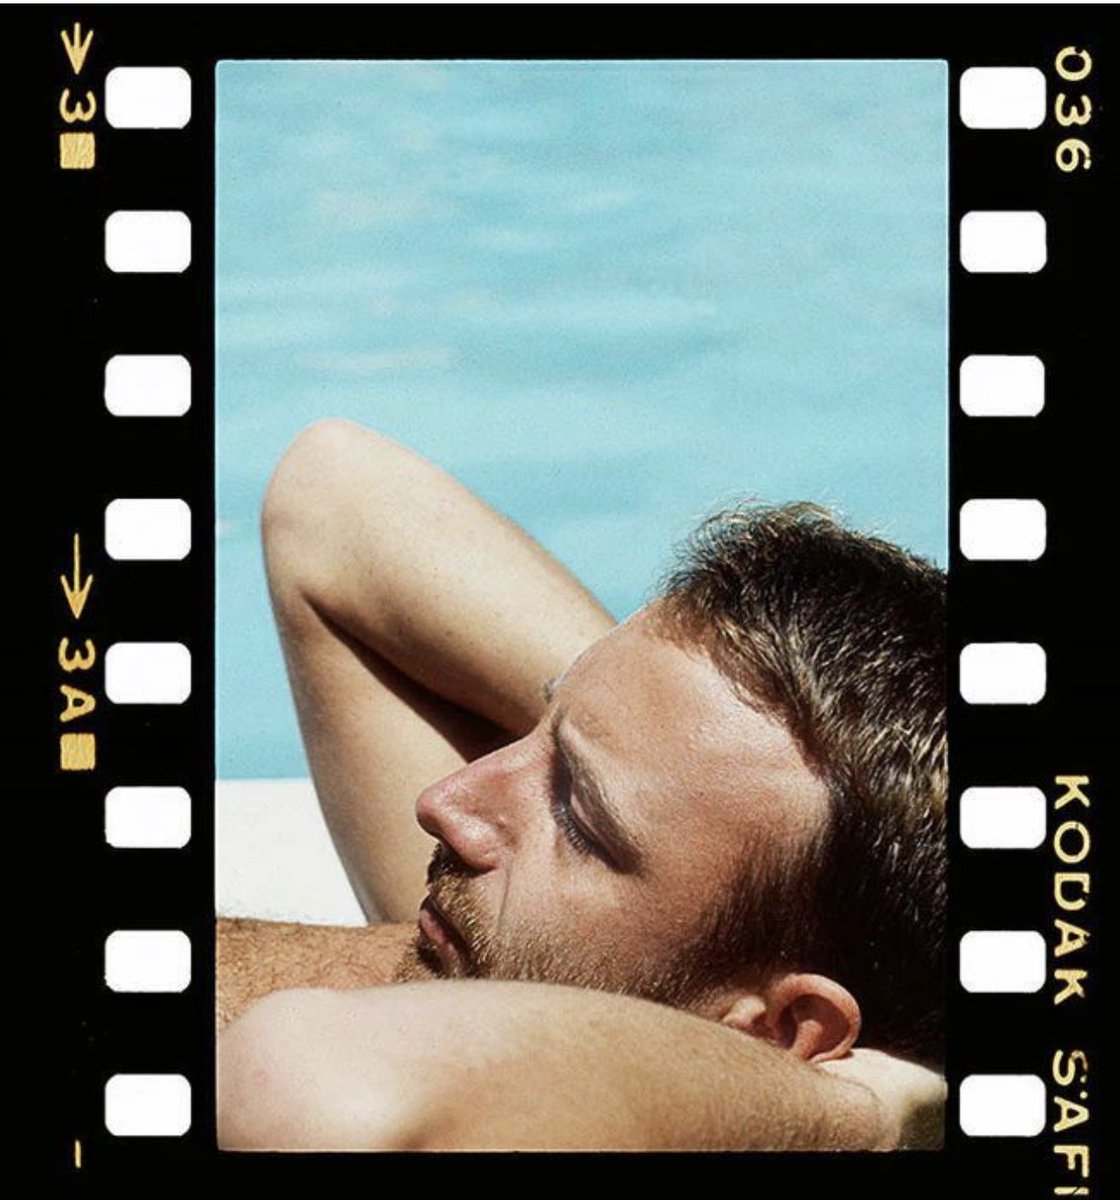 New Order’s swimming pool photo shoot for a Sounds cover feature by Kevin Cummins at the Holiday Inn pool in Washington DC, on July 9, 1983, during the band’s US tour. c/o TheUnderestimator #NewOrder @NewWaveAndPunk